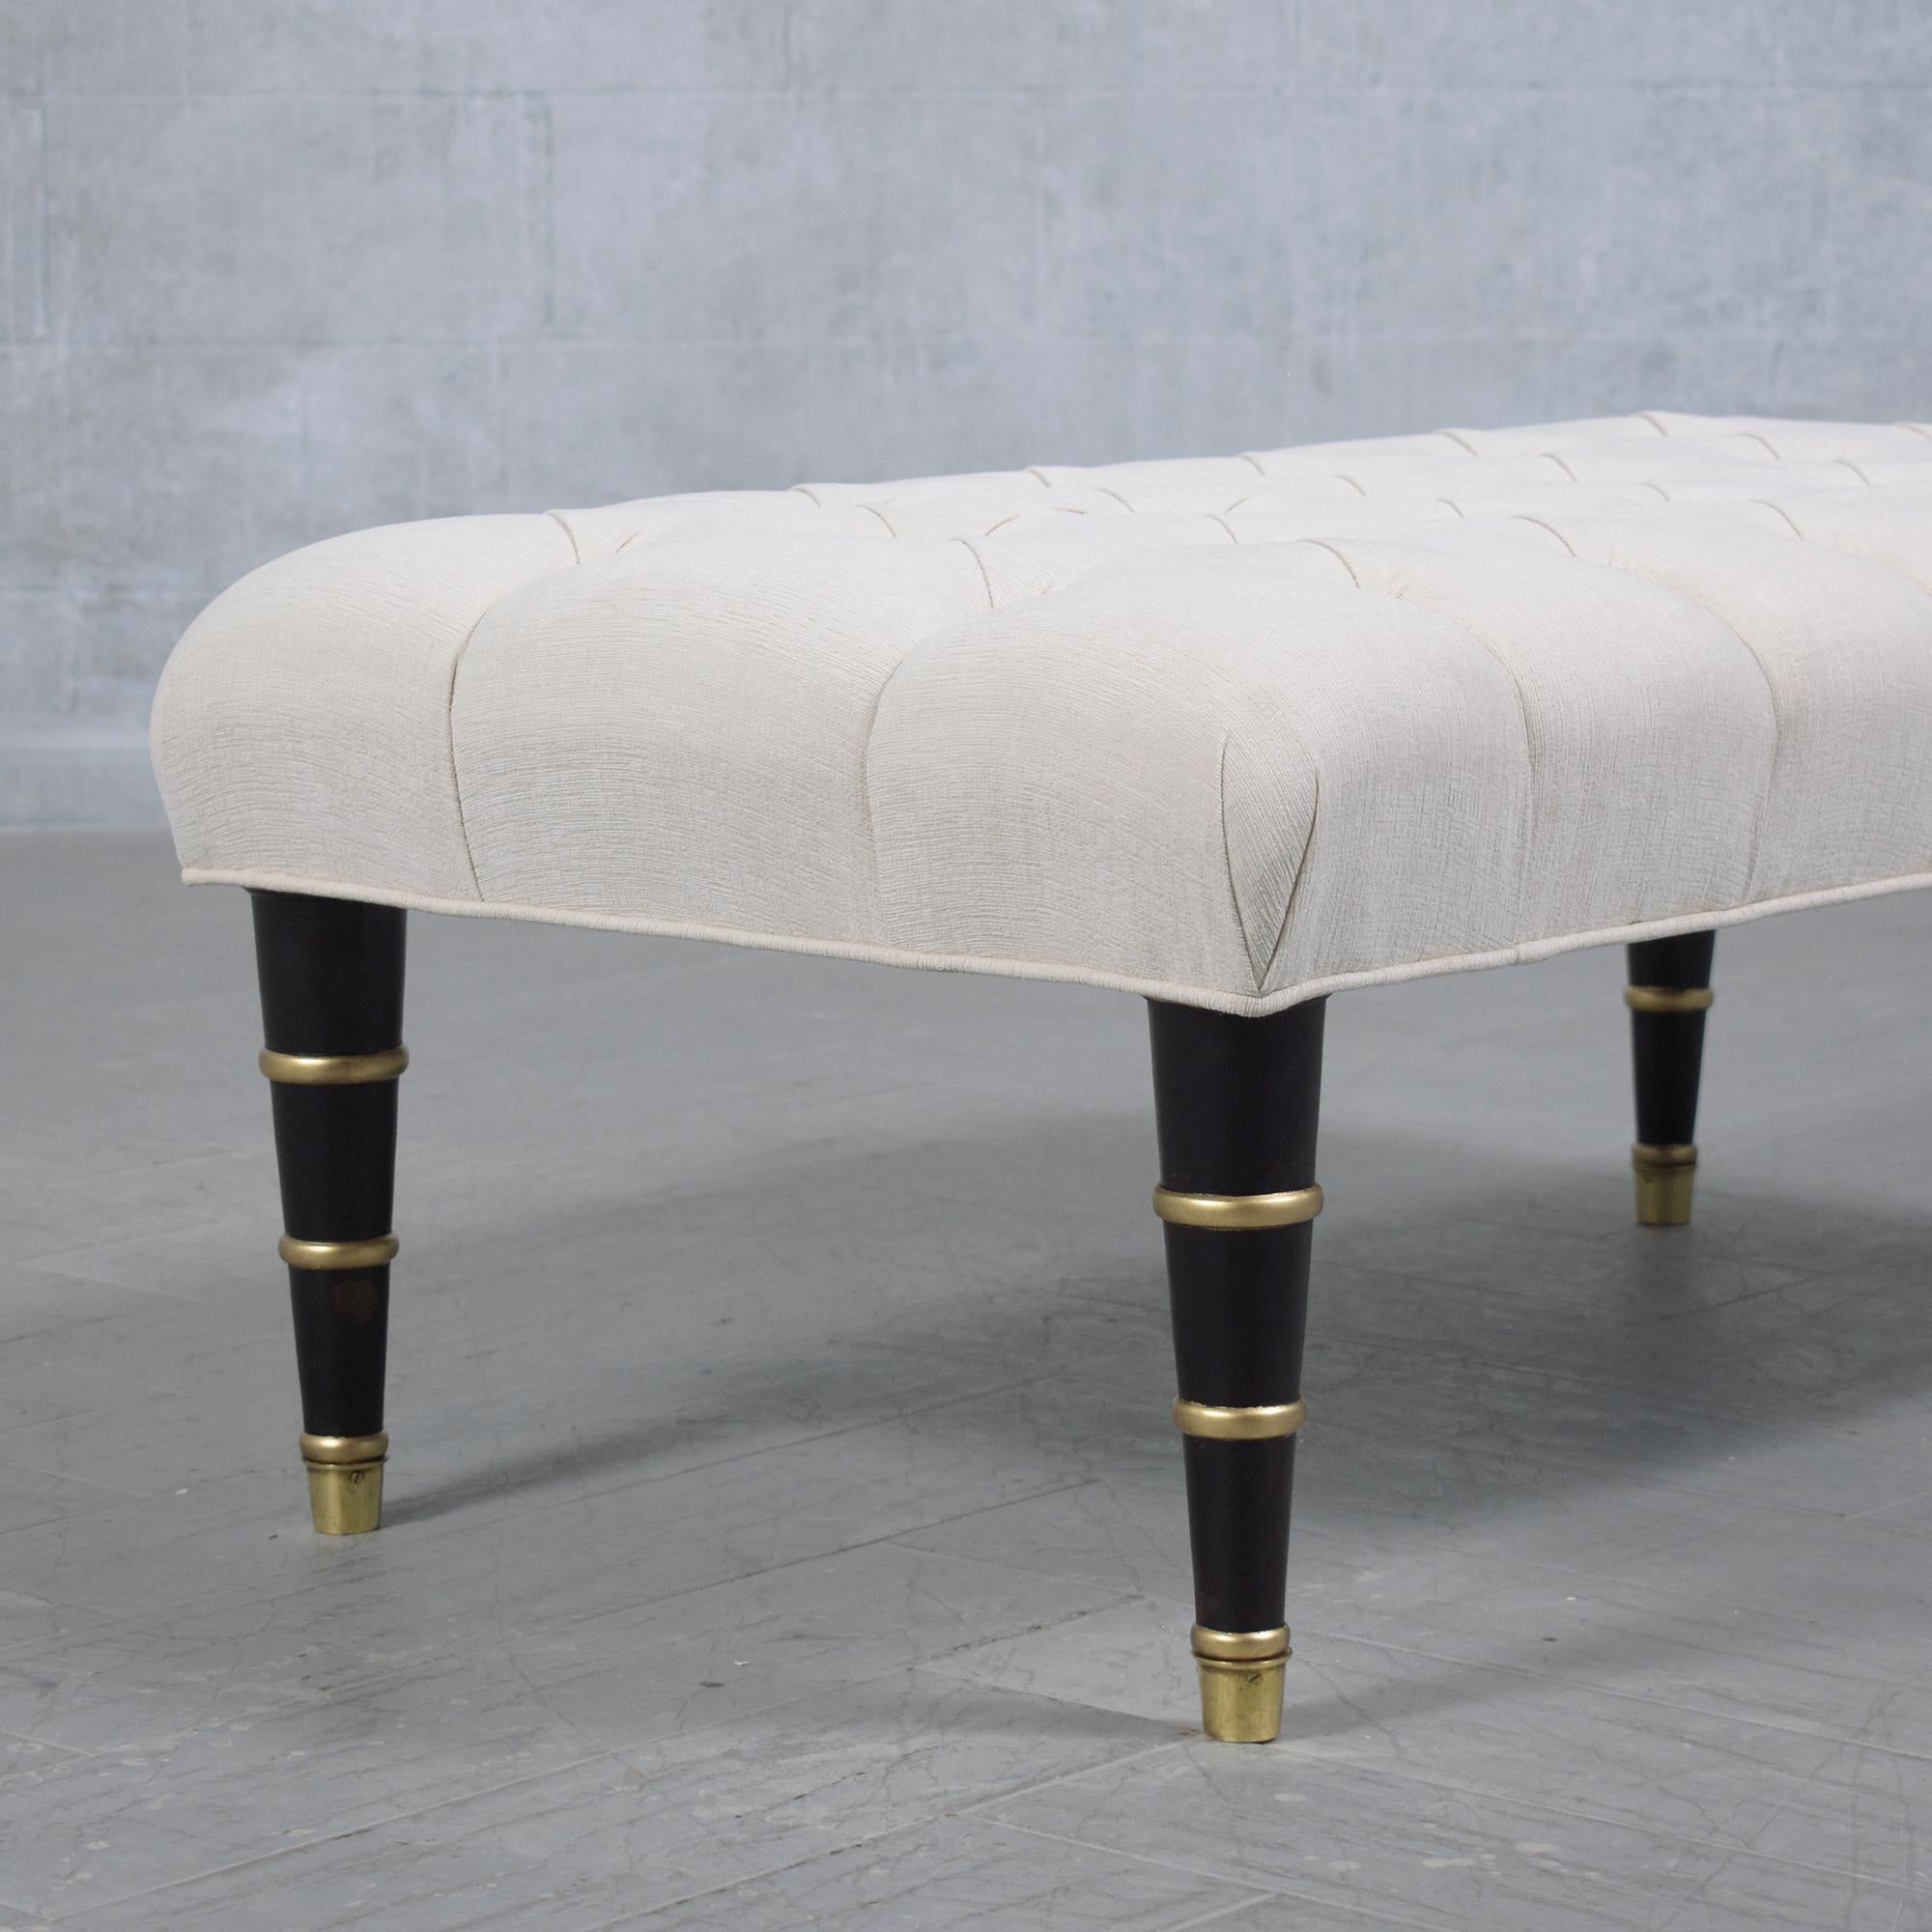 Hand-Crafted Vintage Regency-Style Mahogany Bench: Ebonized Finish with Gilt Molding & Brass For Sale